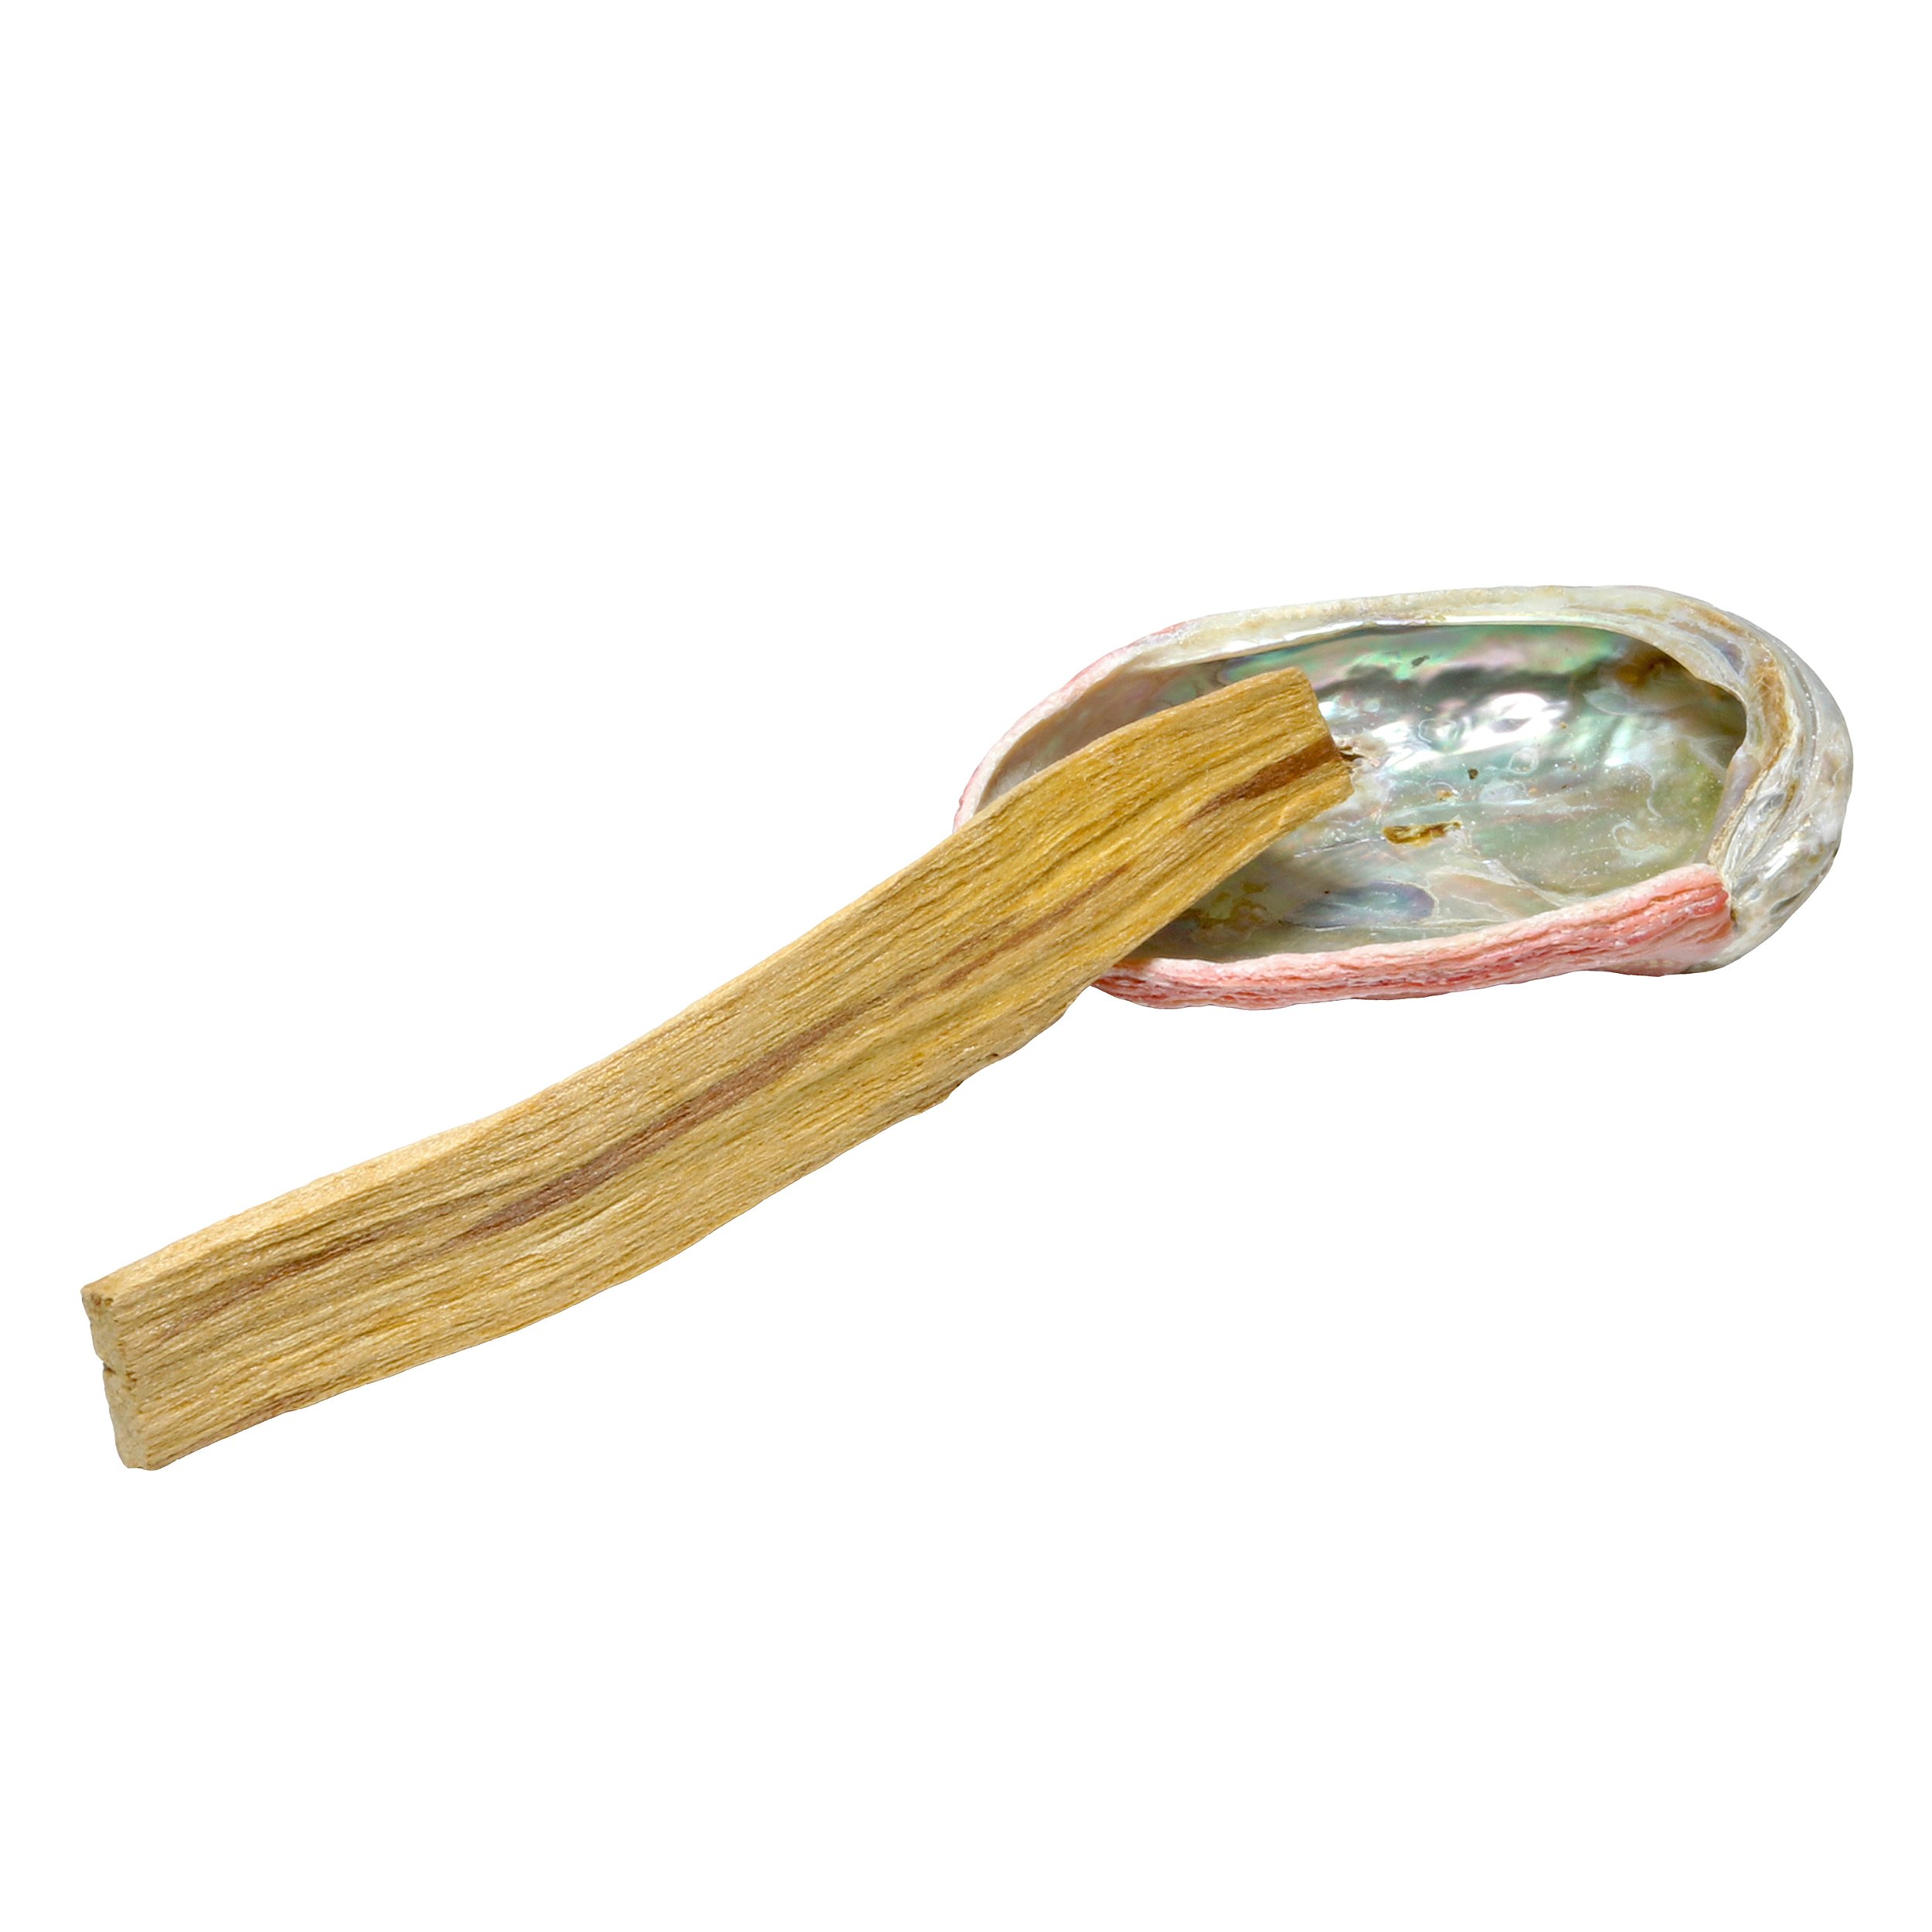 Teal Red Abalone Shell 2" with Palo Santo Stick